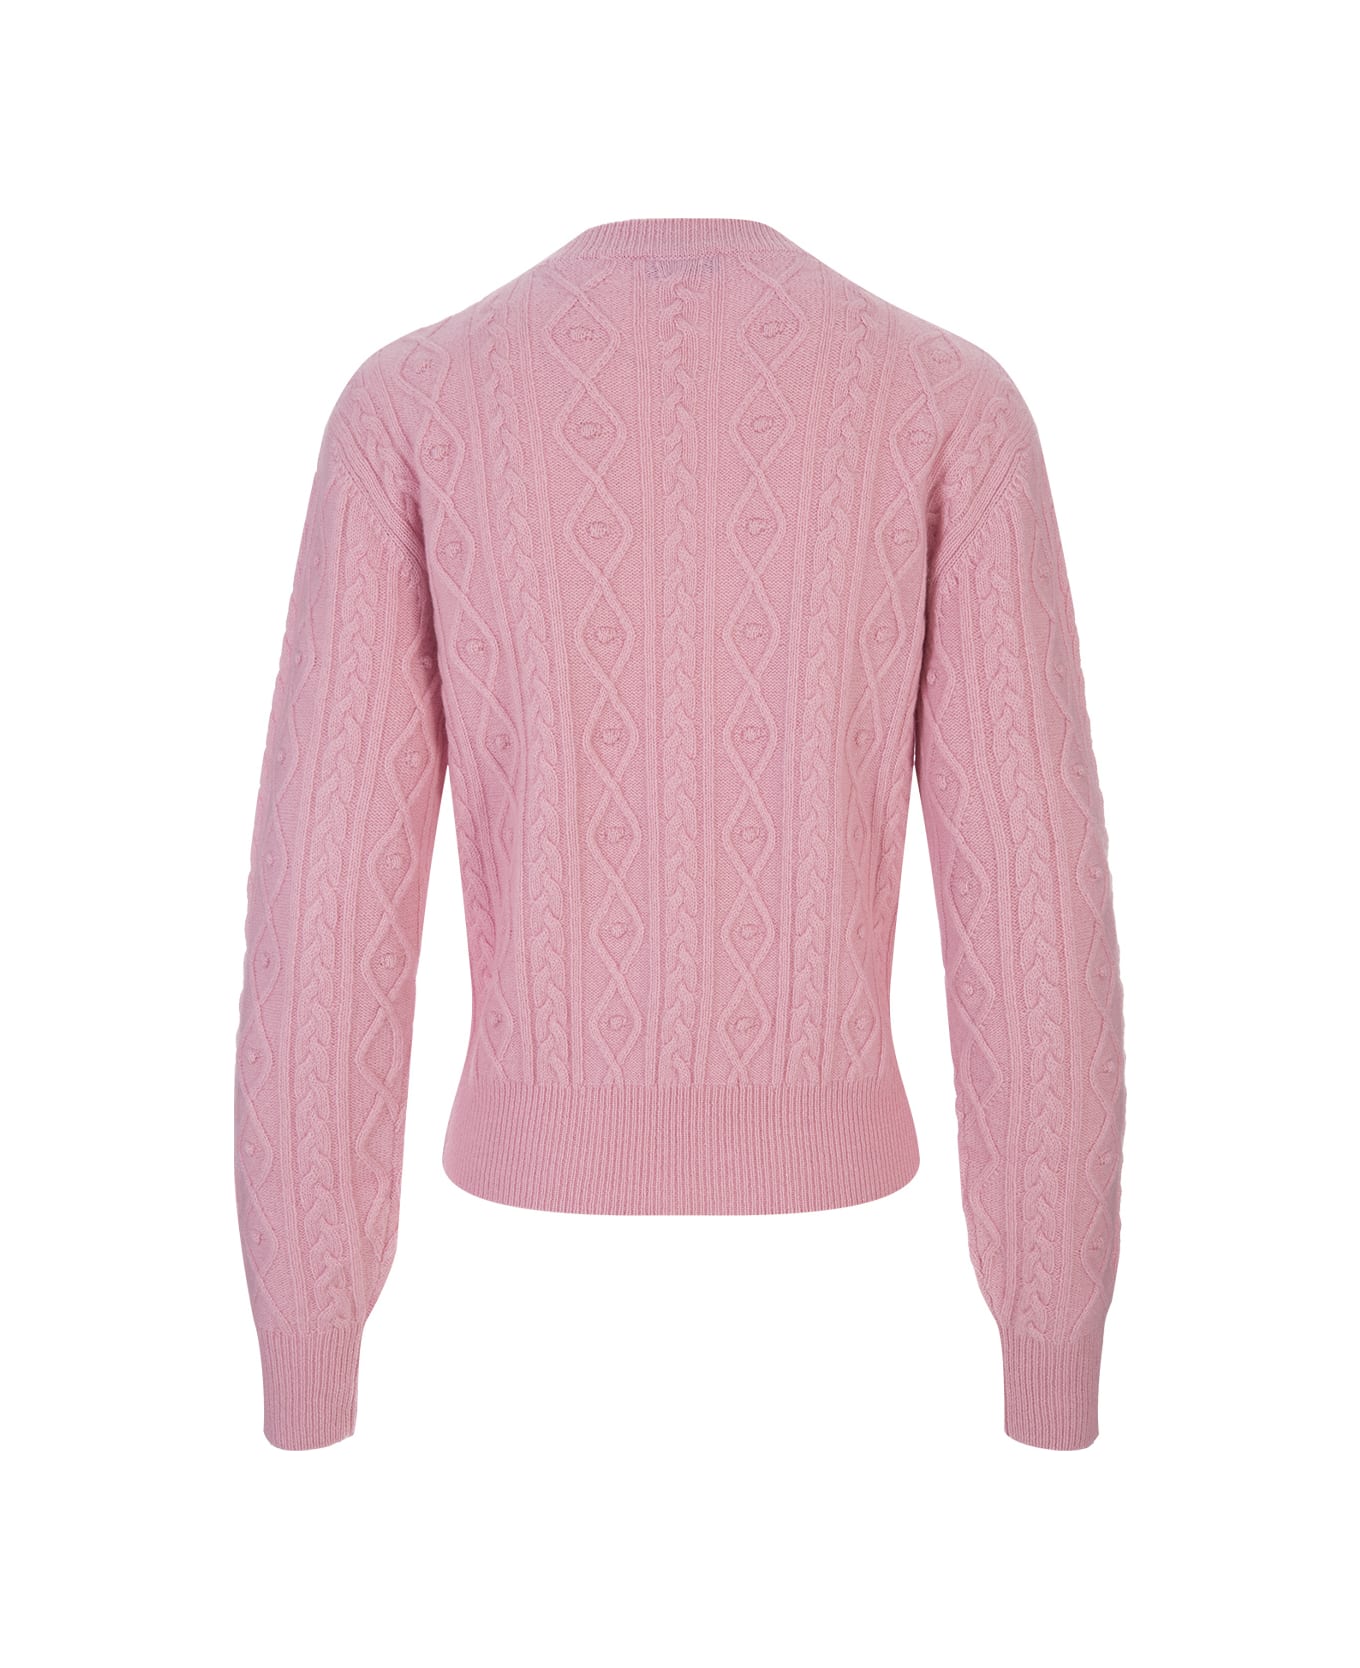 Paco Rabanne Pink Pullover With Crystals - Pink